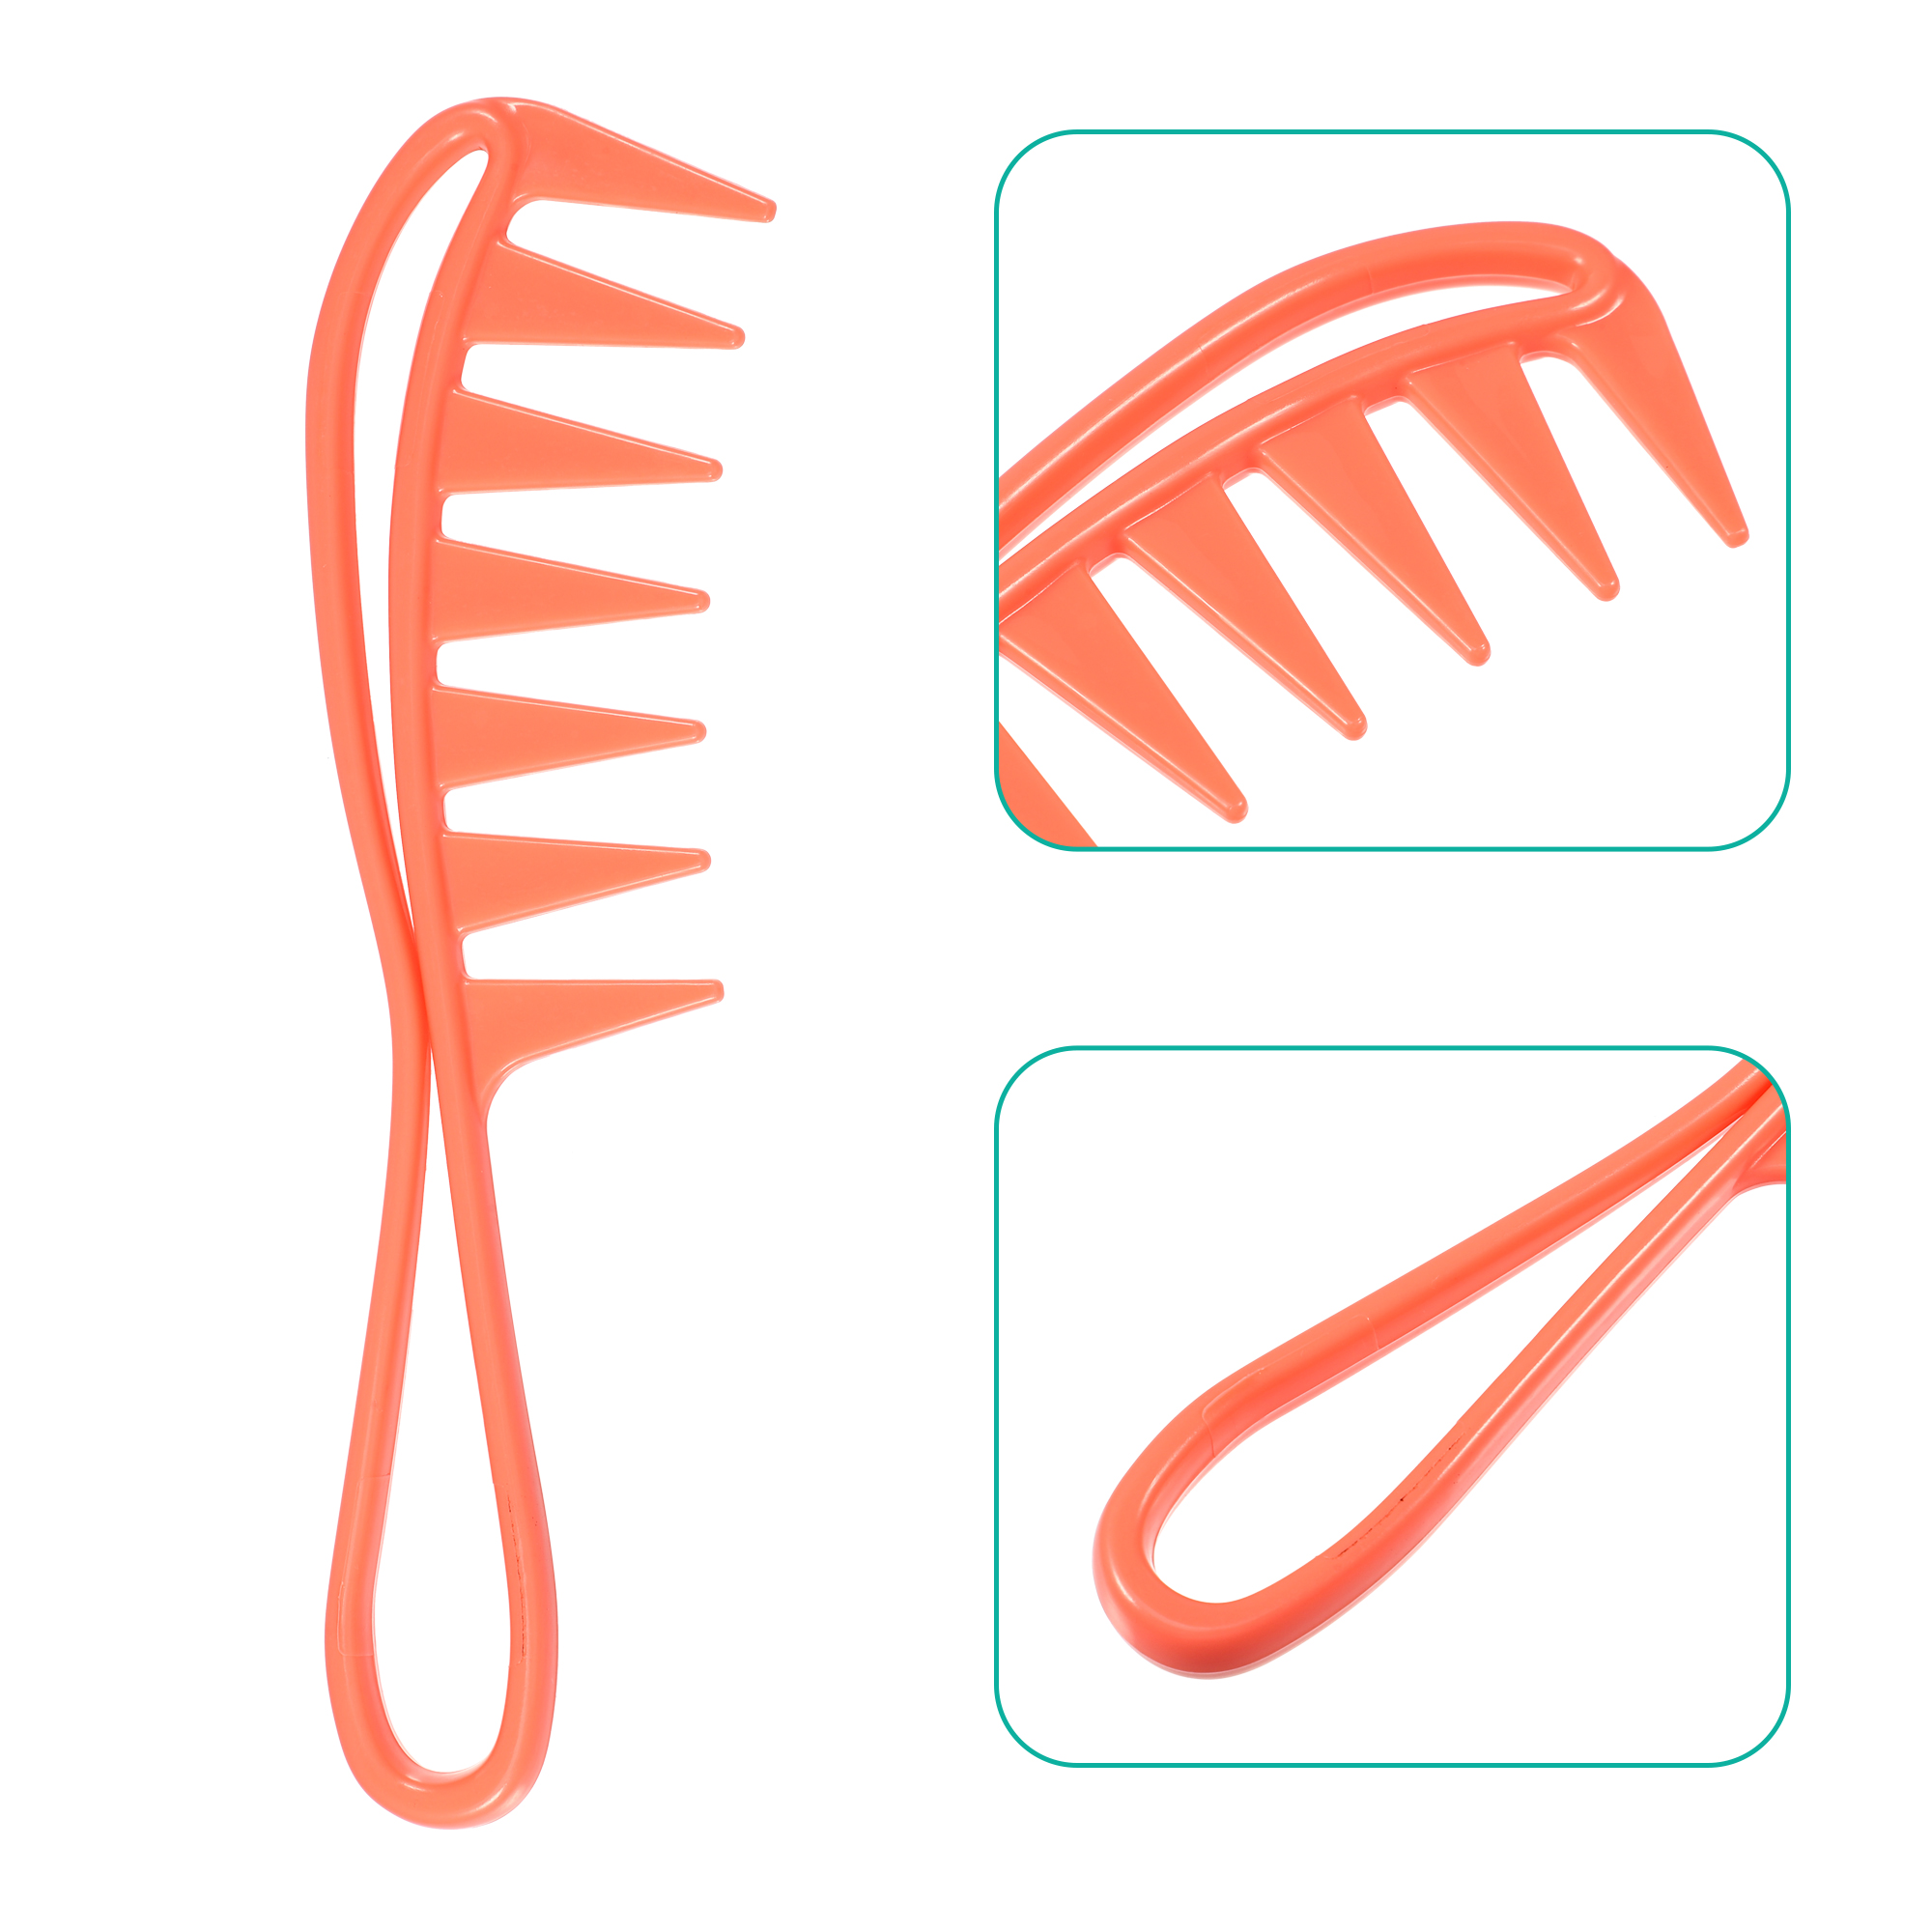 Unique Bargains 3 Pcs Hair Comb Wide Tooth Anti Static for Thick Curly Hair Hair Care Pink